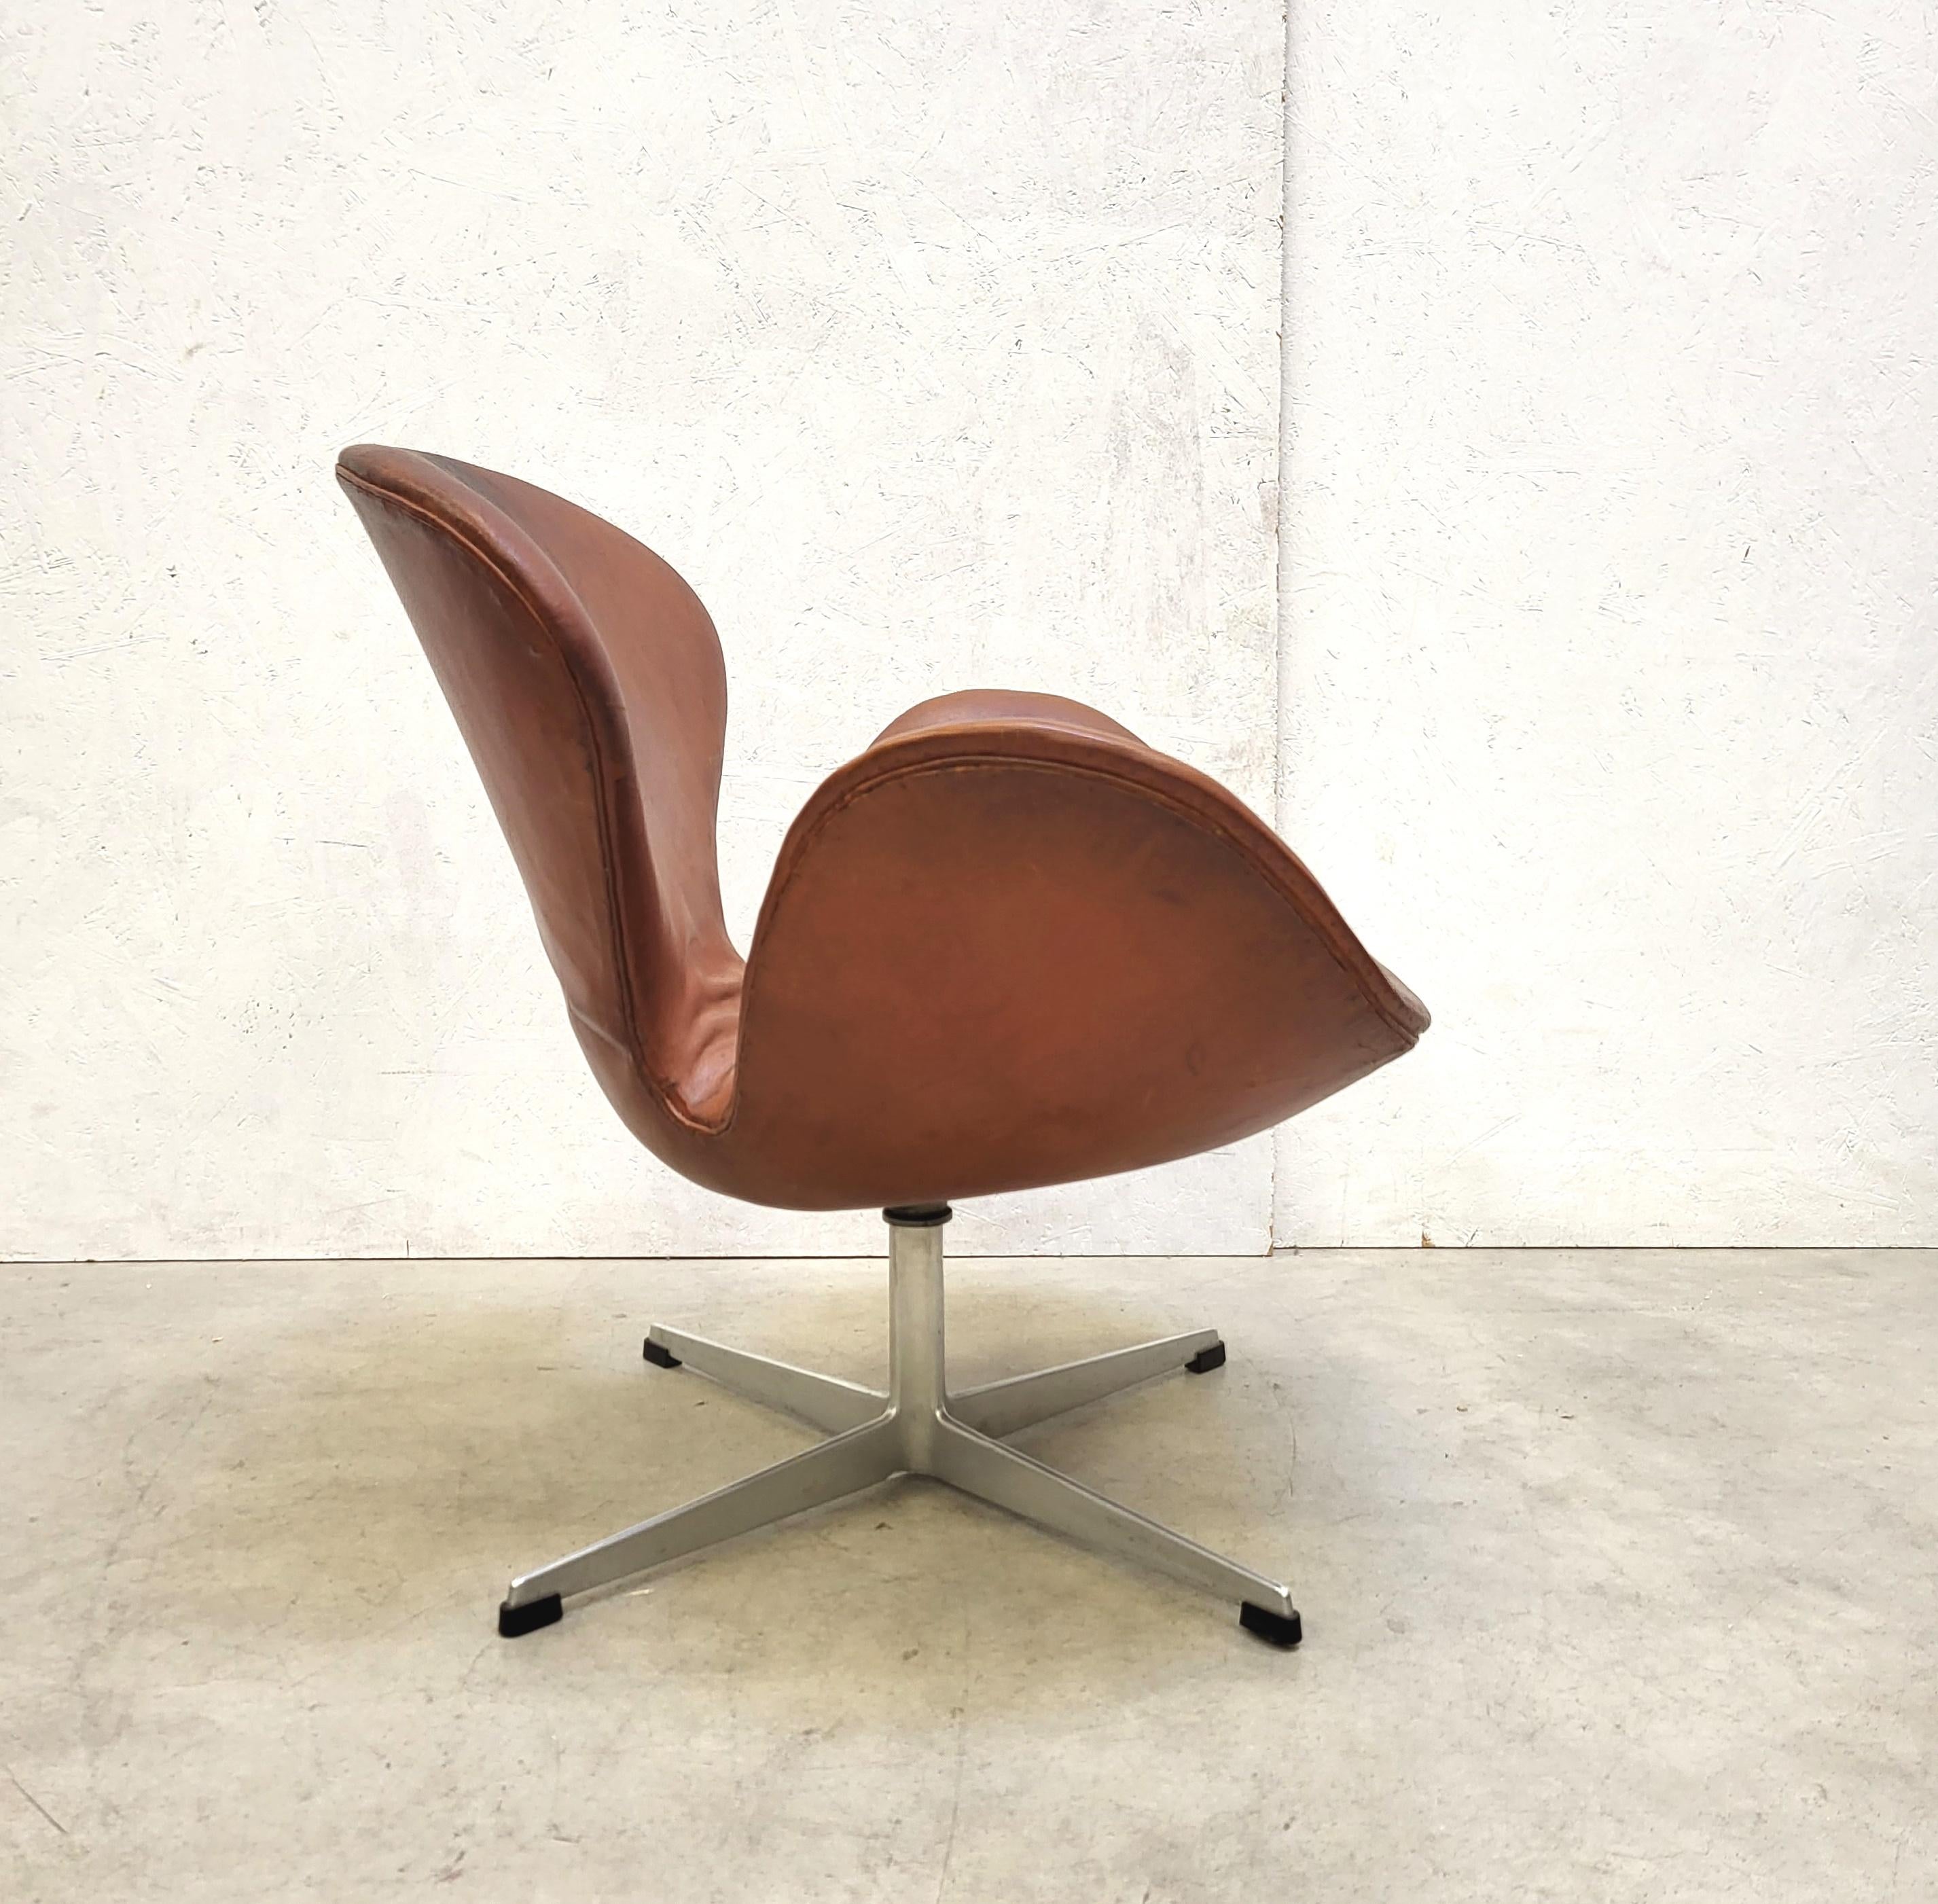 This very rare 1st edition Swan chair was designed in the 1950s by Arne Jacobsen for the SAS Hotel in Copenhagen and produced by Fritz Hansen around 1958/1959. 

The chair features a wonderful cognac leather upholstery which shows an amazing